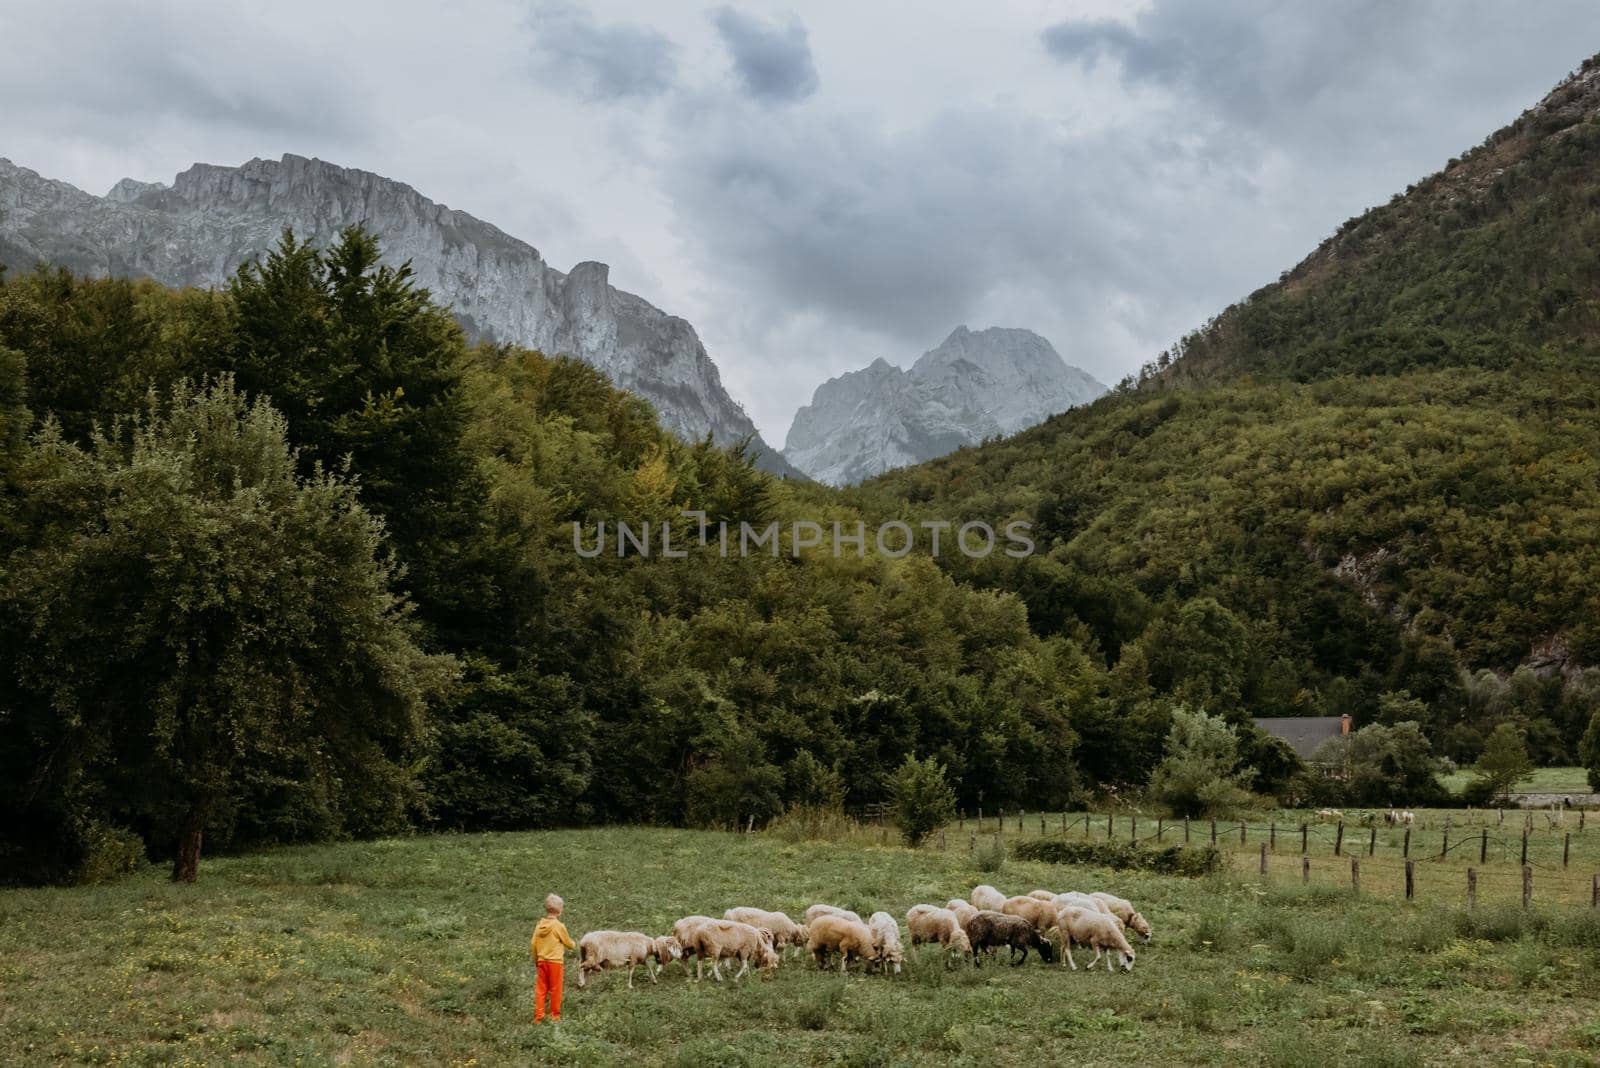 Cute little boy with a sheeps on farm, best friends, boy and lamb against the backdrop of greenery, poddy and child on the grass. Little boy herding sheep in the mountains. Little kid and sheeps in mountains, childs travel learn animals by Andrii_Ko